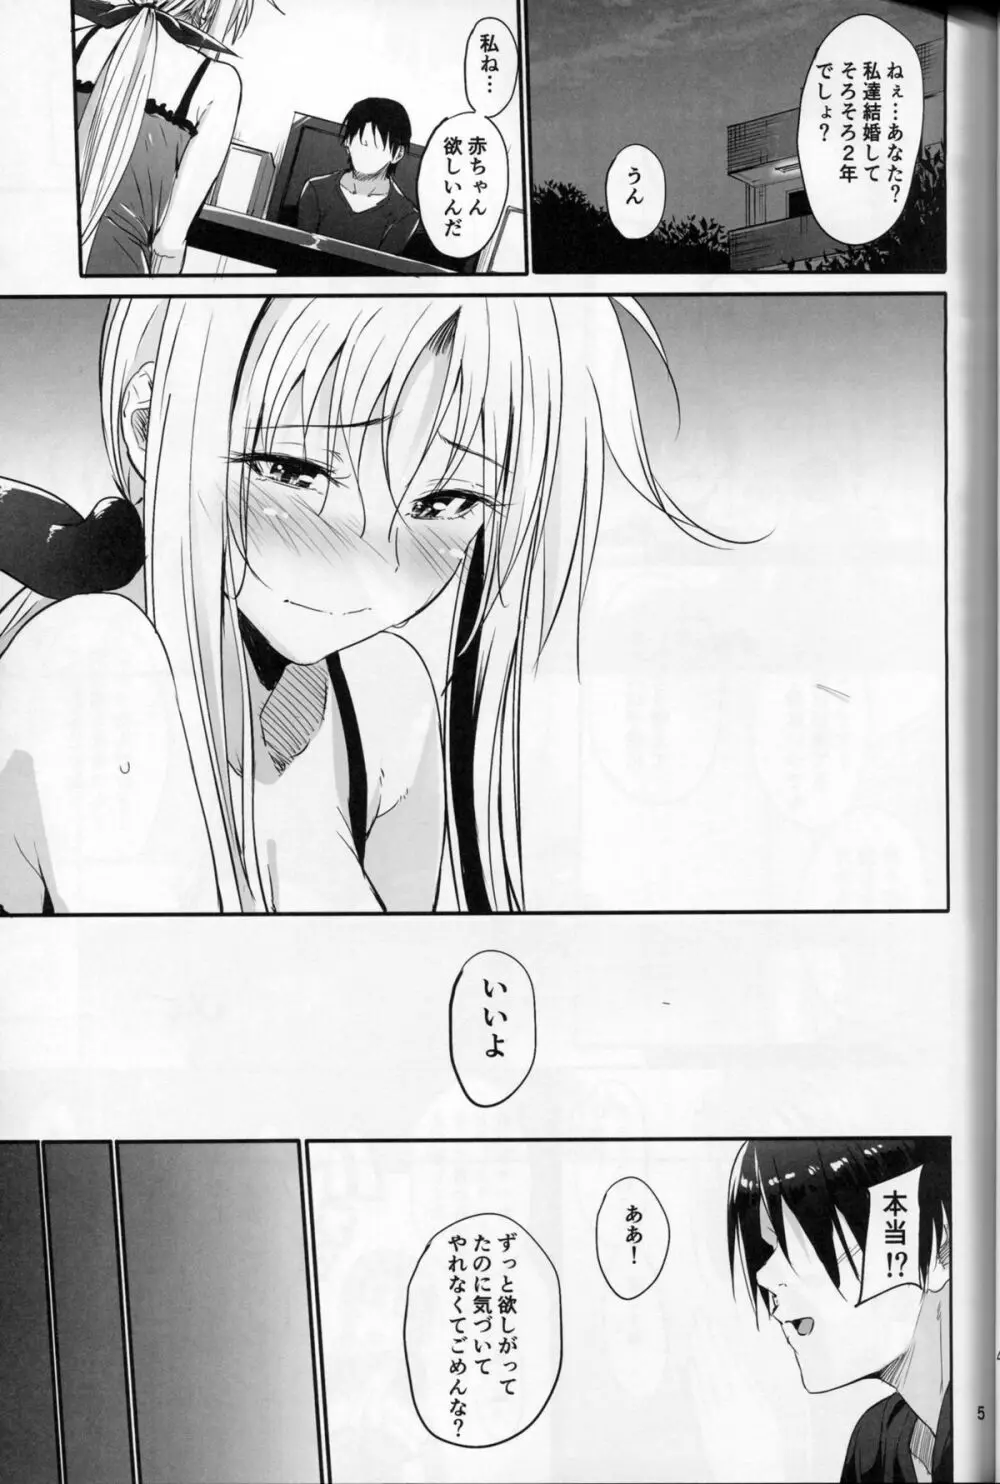 Home Sweet Home ～フェイト編 6～ Page.4